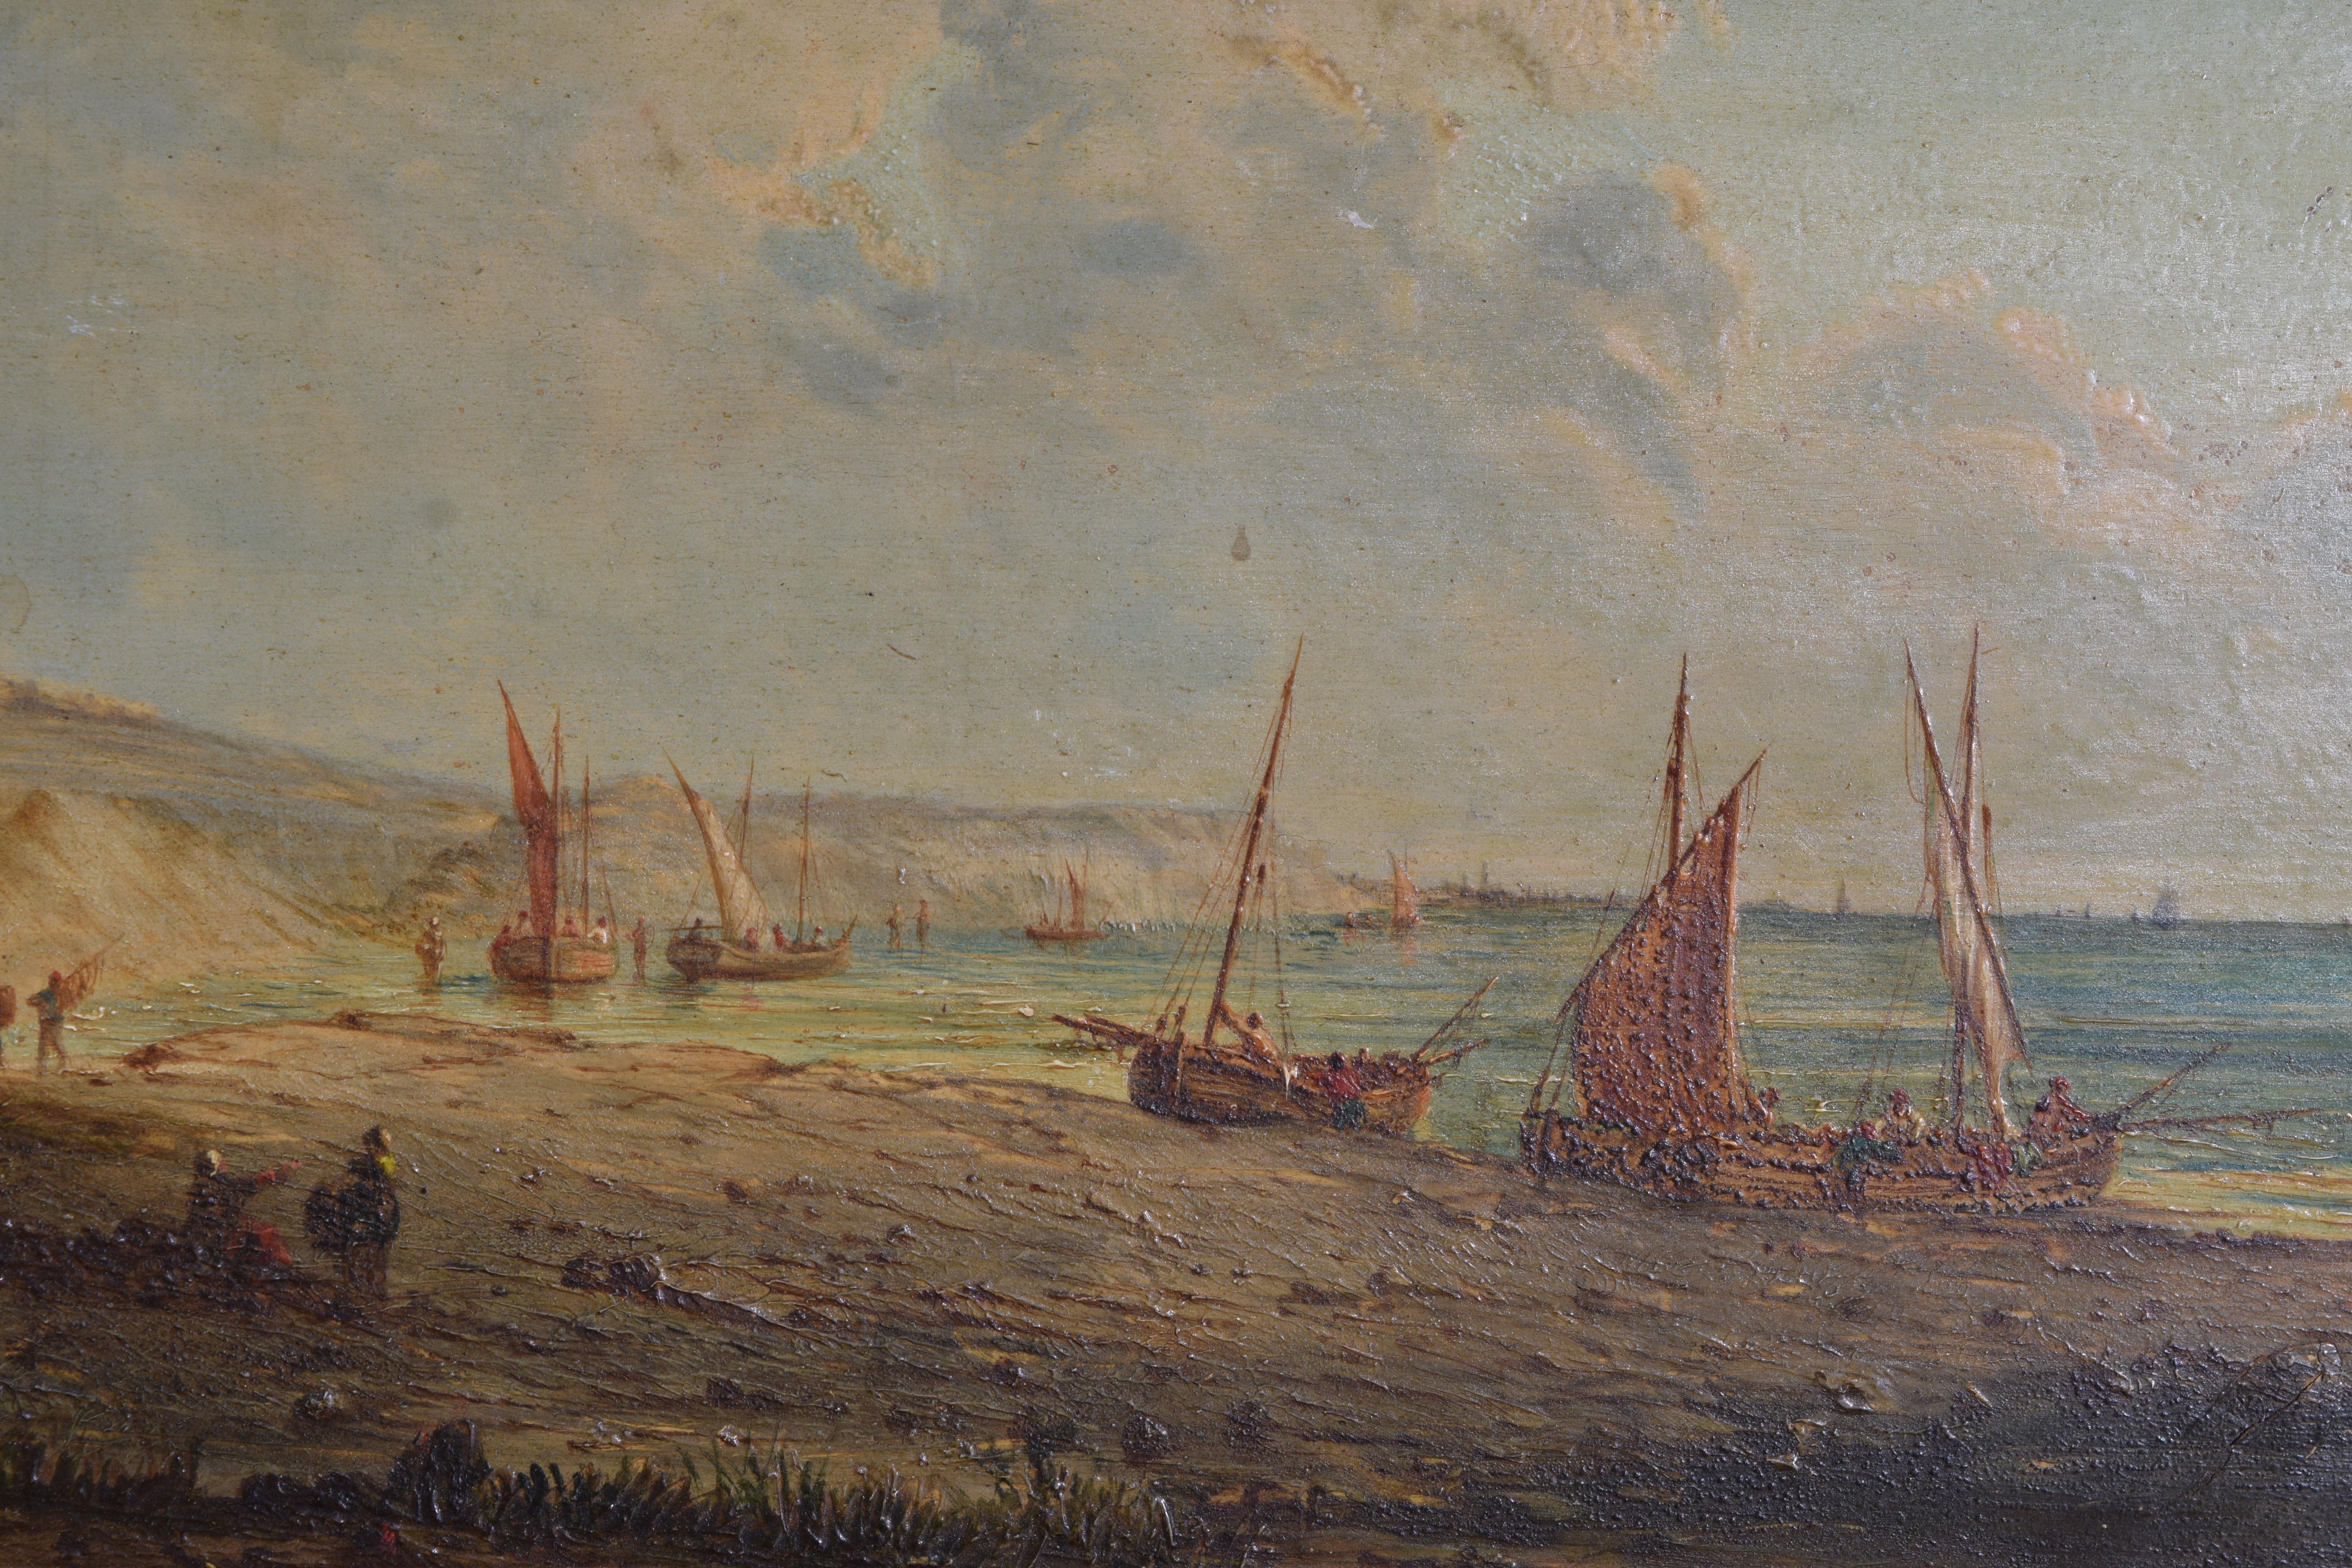 Paint French Oil on Board, “Fishing Boats and Fishermen Hauling in the Catch”, 20thc